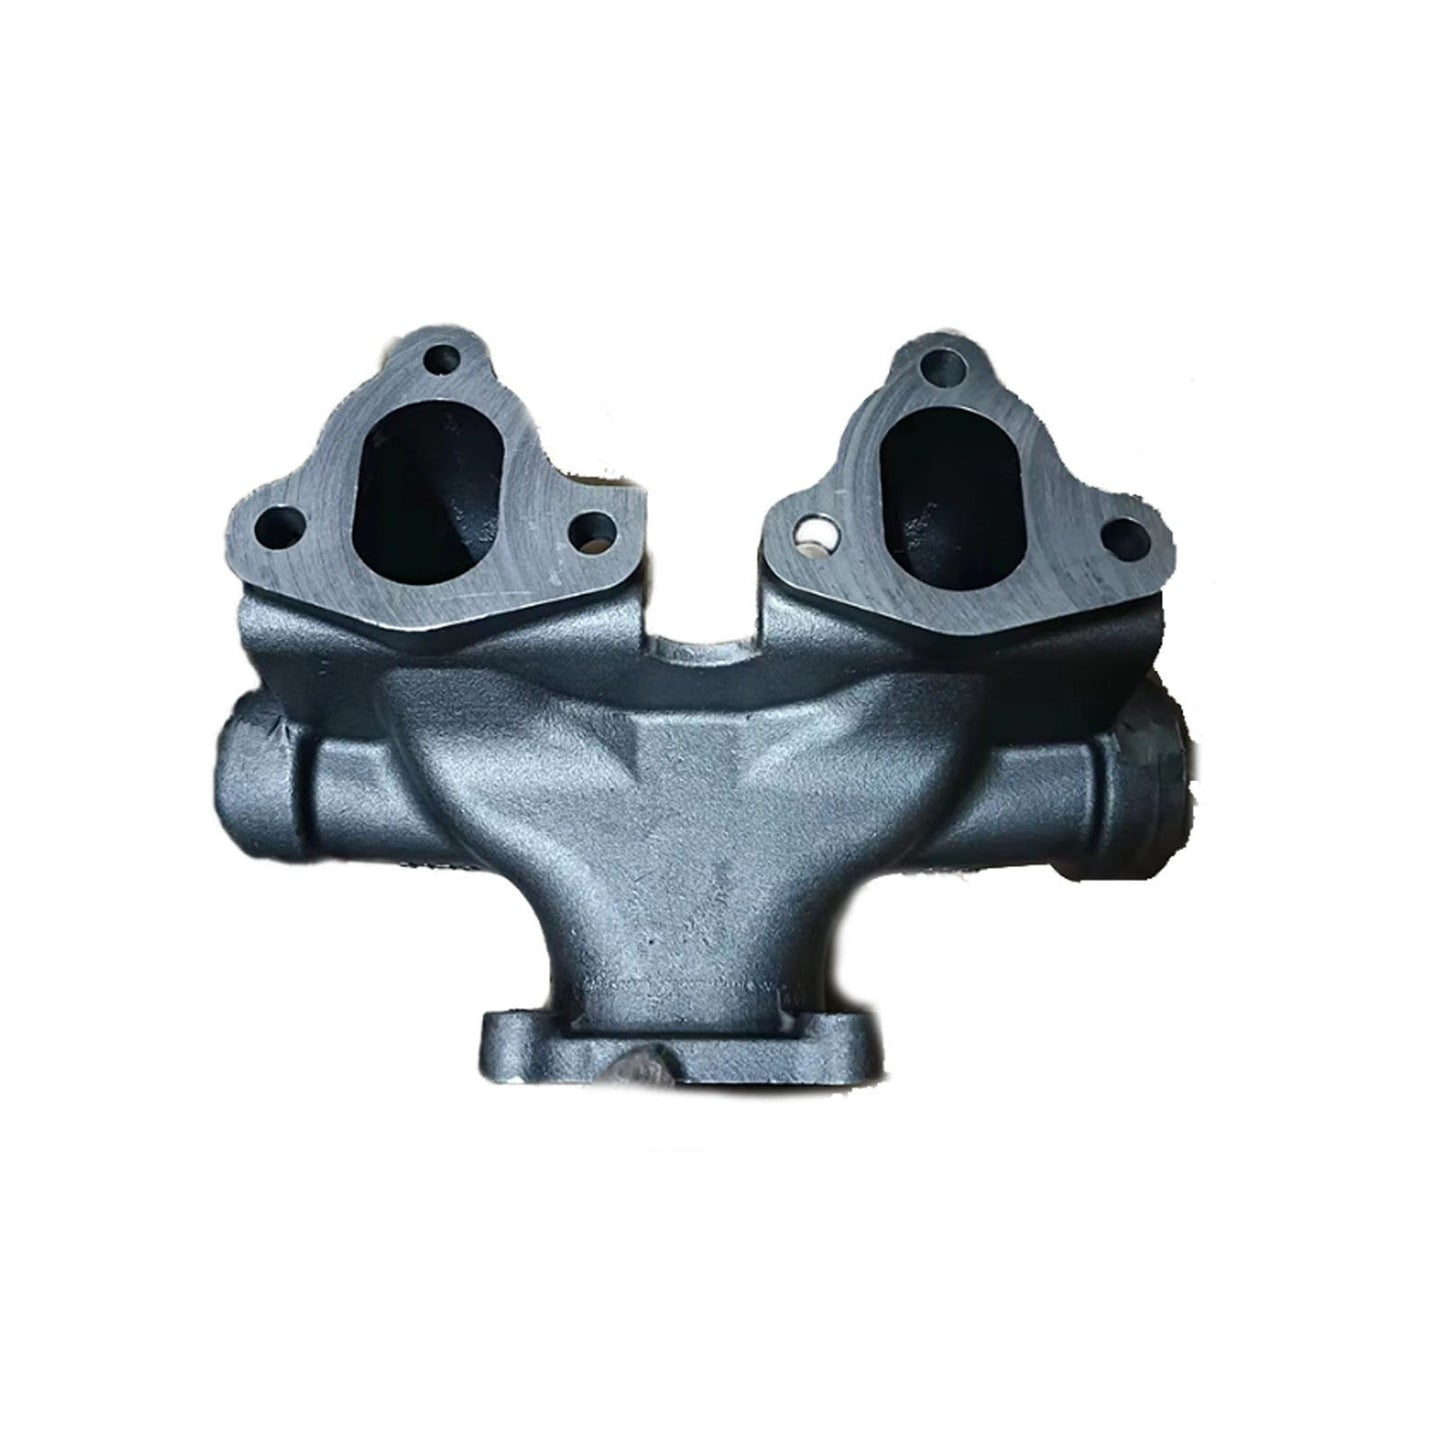  Middle Section Exhaust Manifold 6150-11-5140 6150-11-5120 Fits For Komatsu PC400-7 6D125 Engine